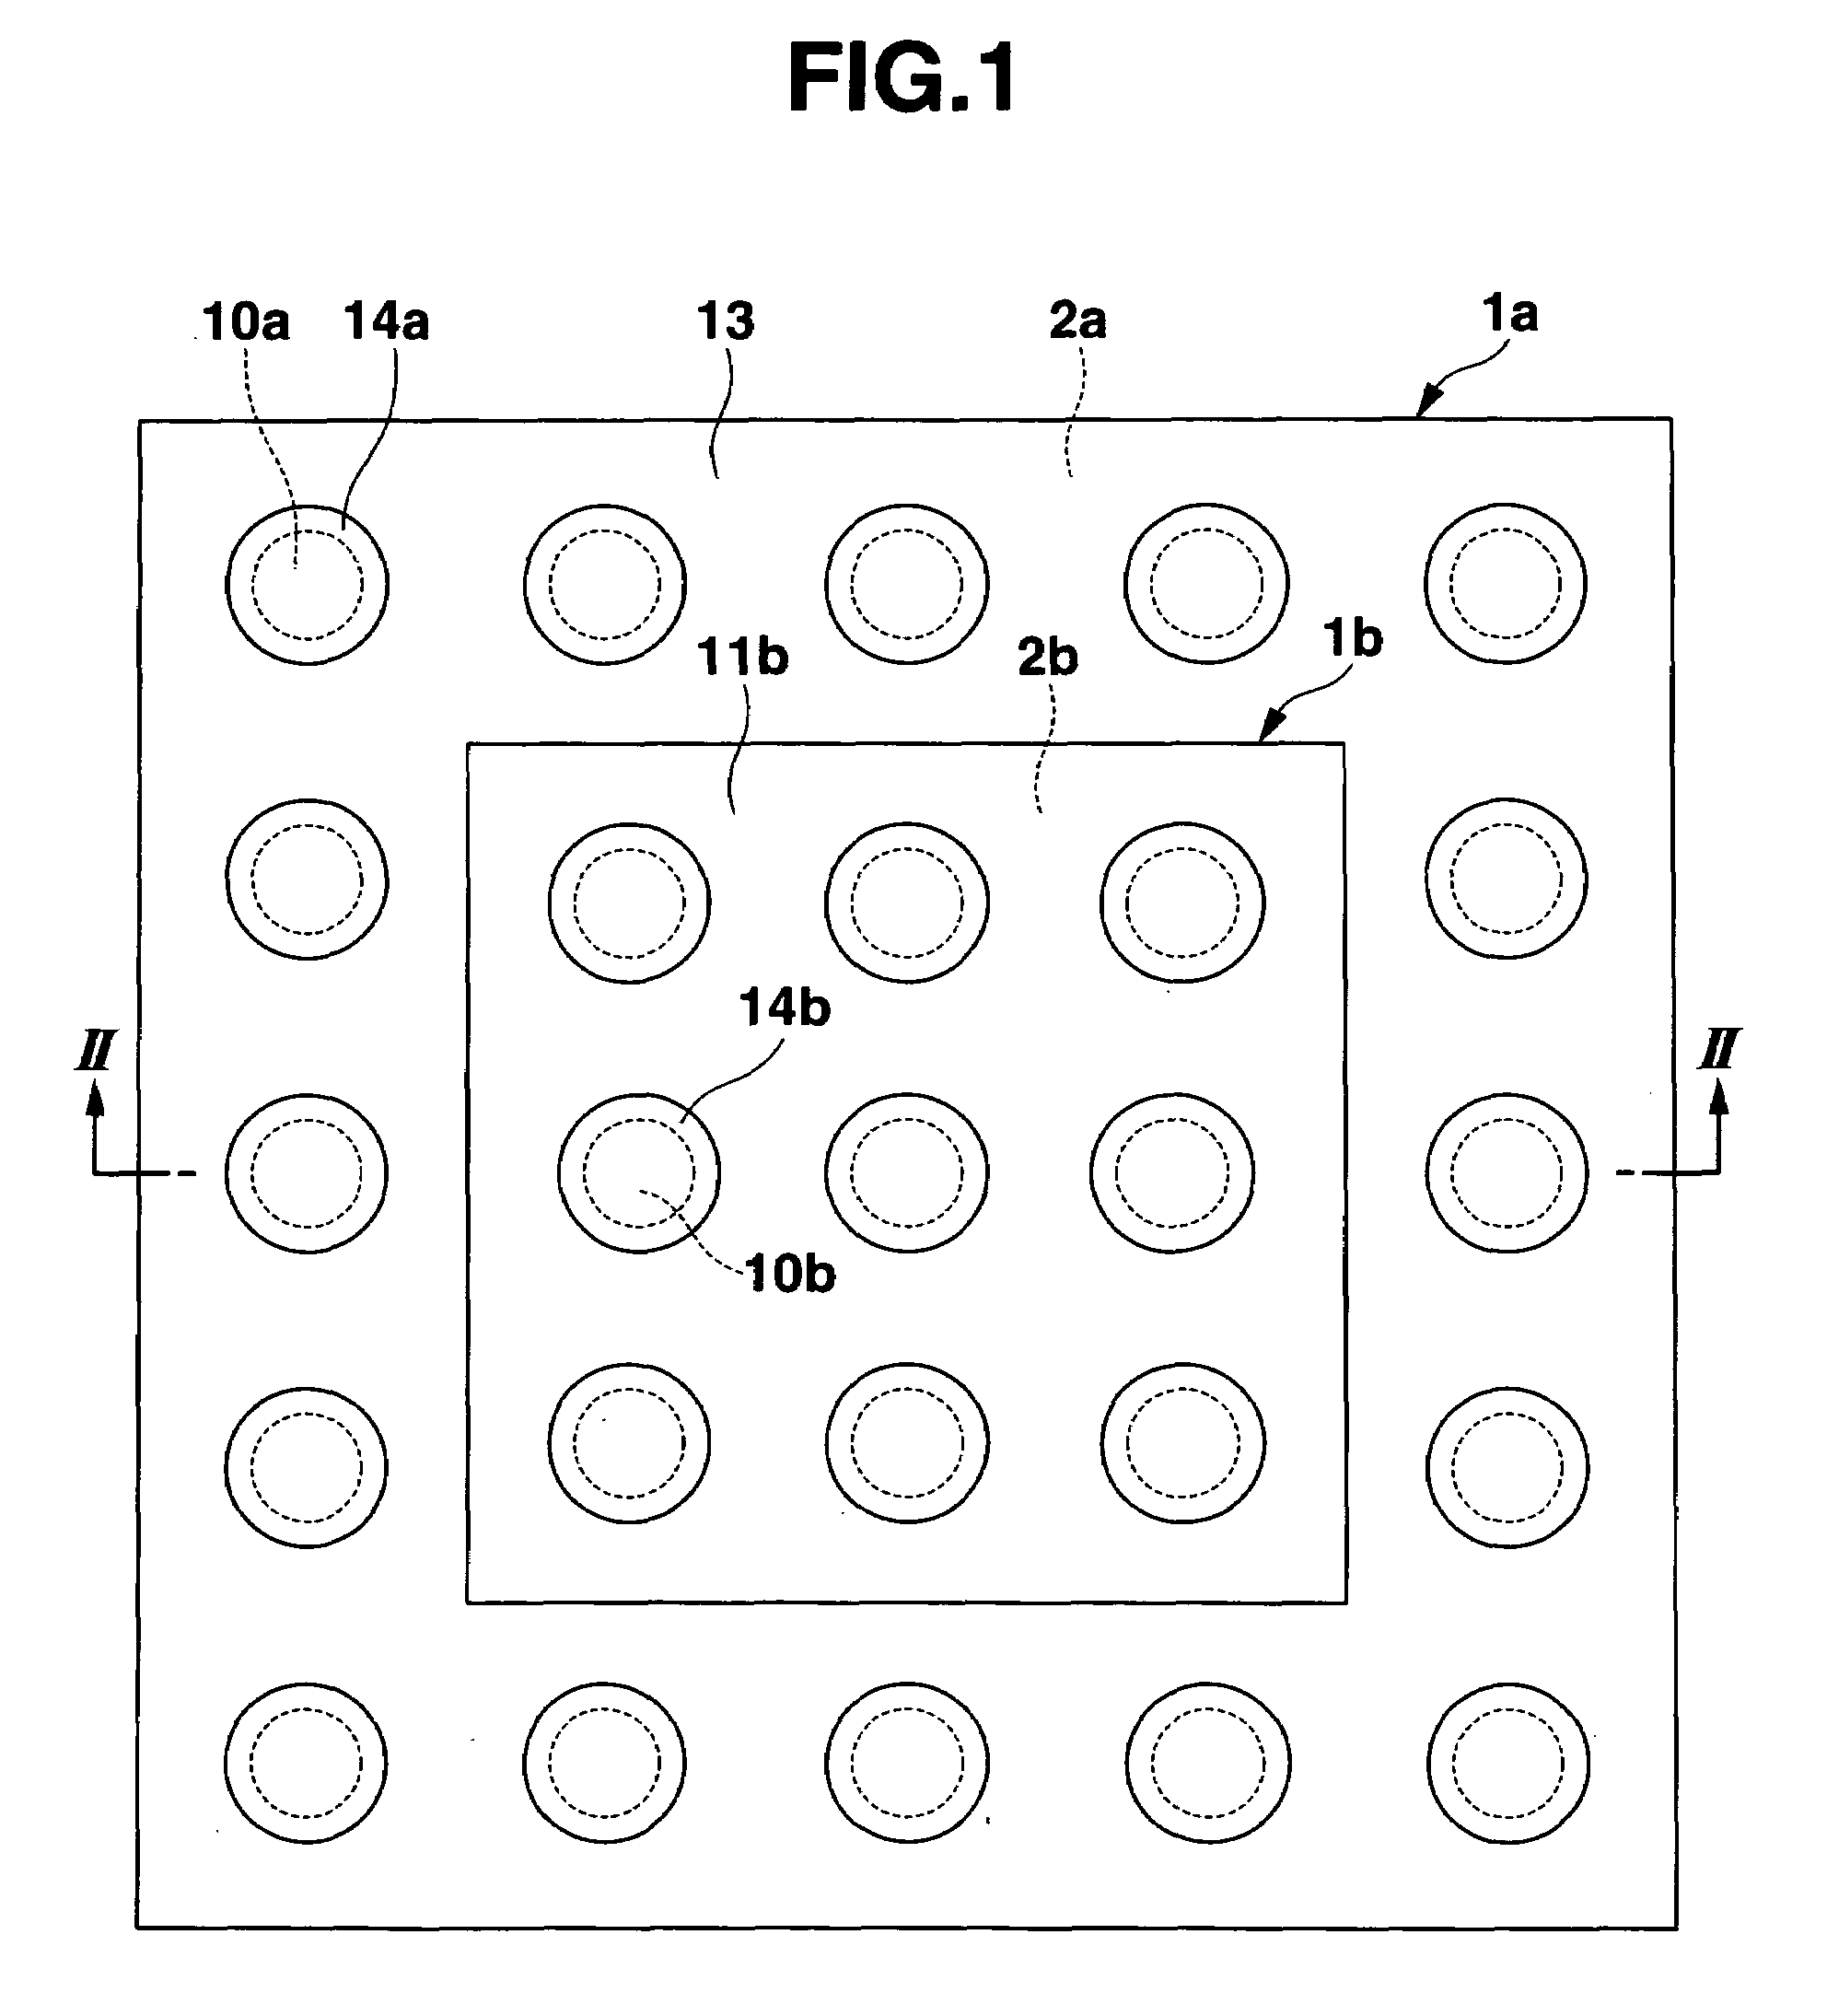 Semiconductor device having a plurality of semiconductor constructs